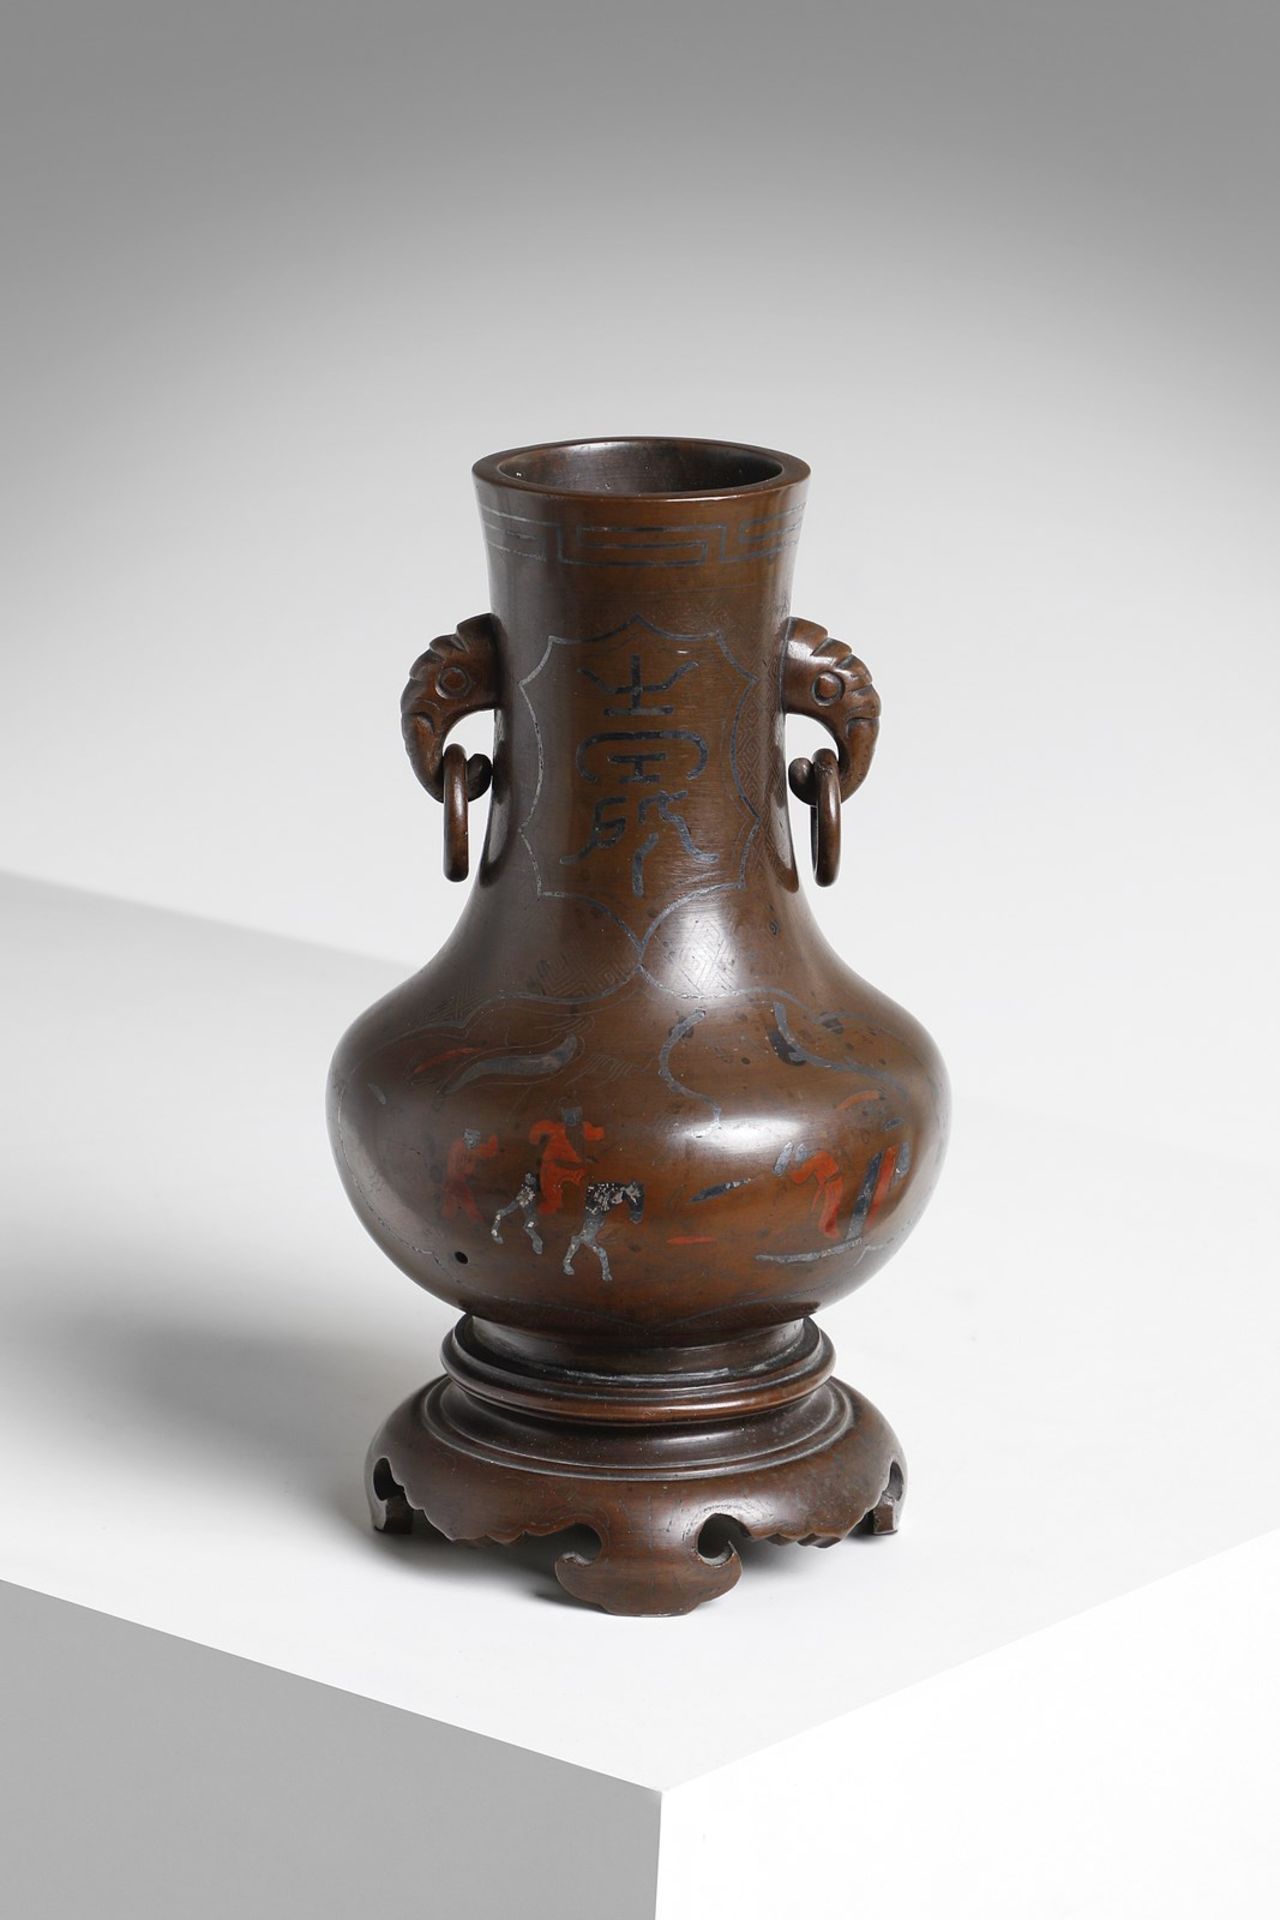 ARTE GIAPPONESE A bronze vase decorated with silver and copper inlays Japan, 19th century .